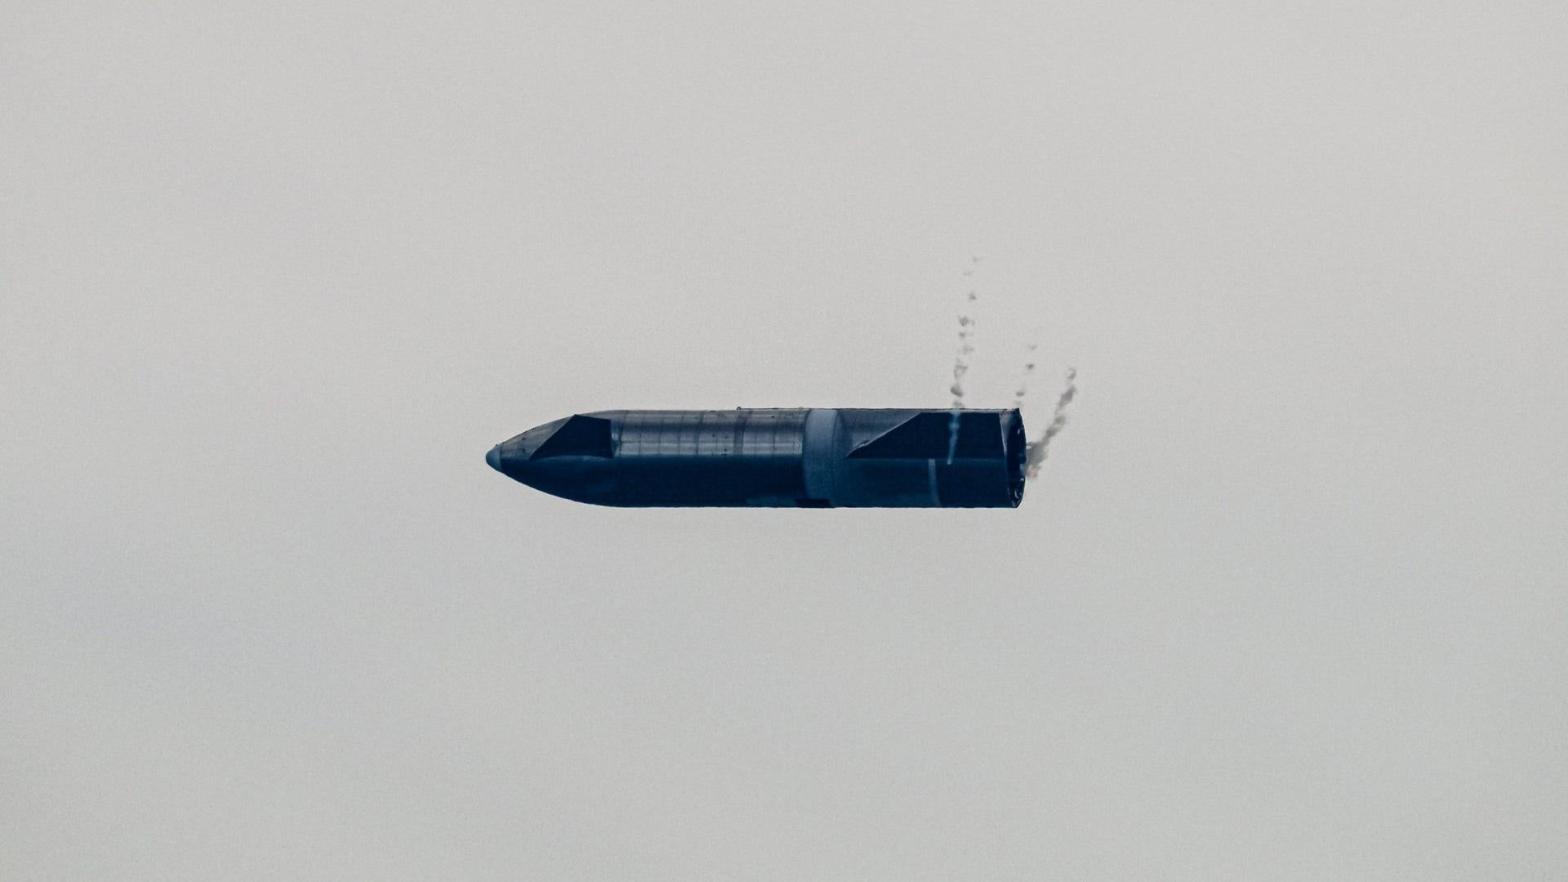 Starship prototype SN10 during its high-altitude flight test on March 3, 2021.  (Image: SpaceX)